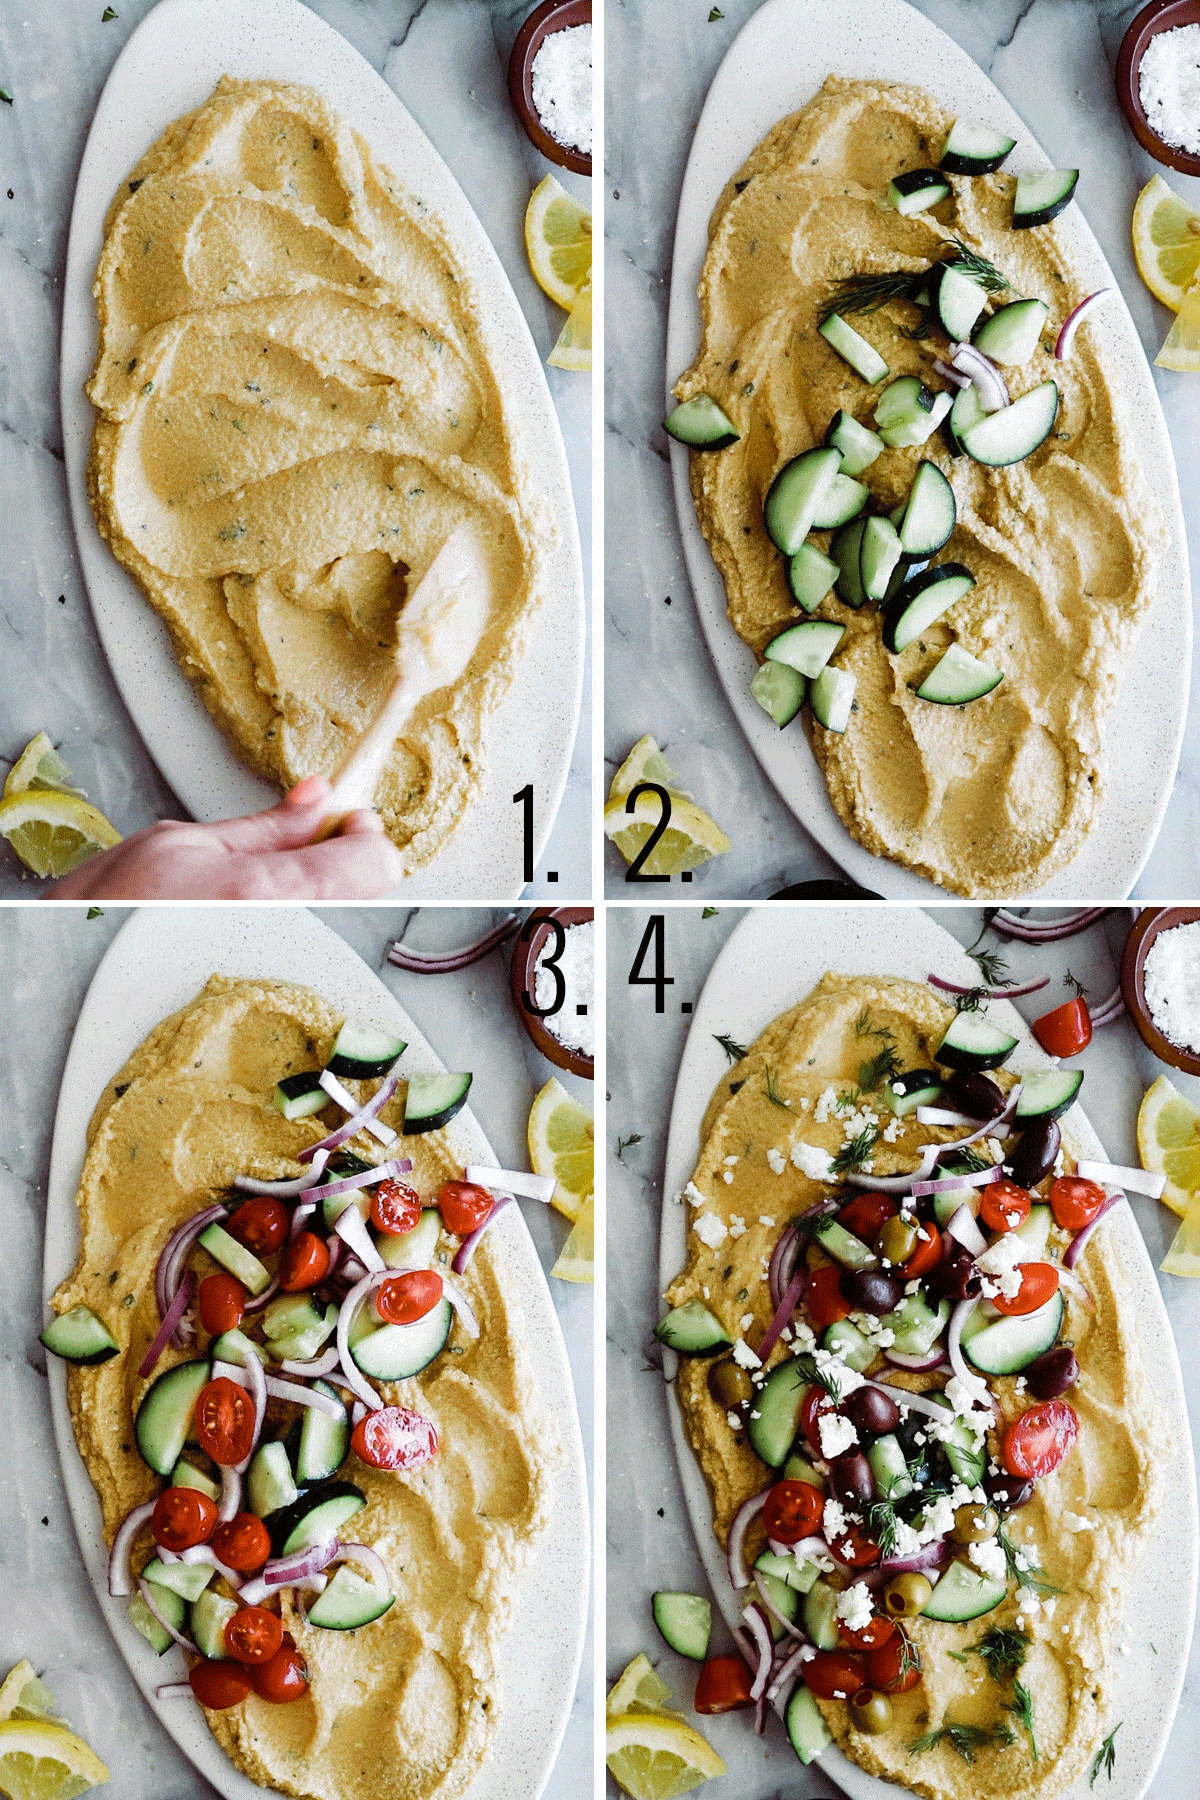 Four photos showing hummus on a platter being loaded with fresh vegetables, olive oil and herbs. 